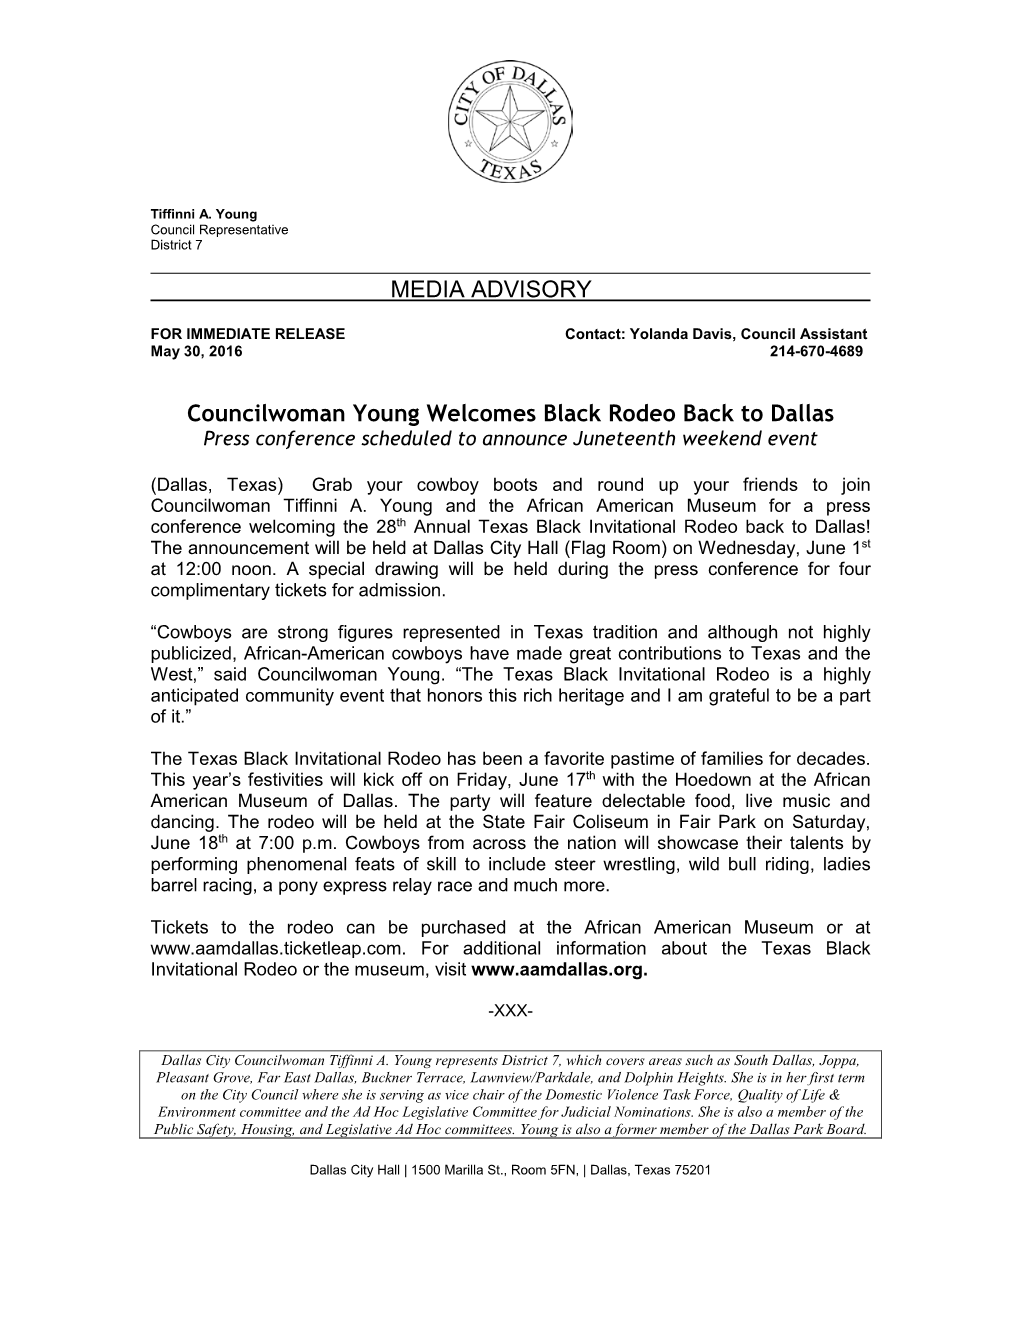 MEDIA ADVISORY Councilwoman Young Welcomes Black Rodeo